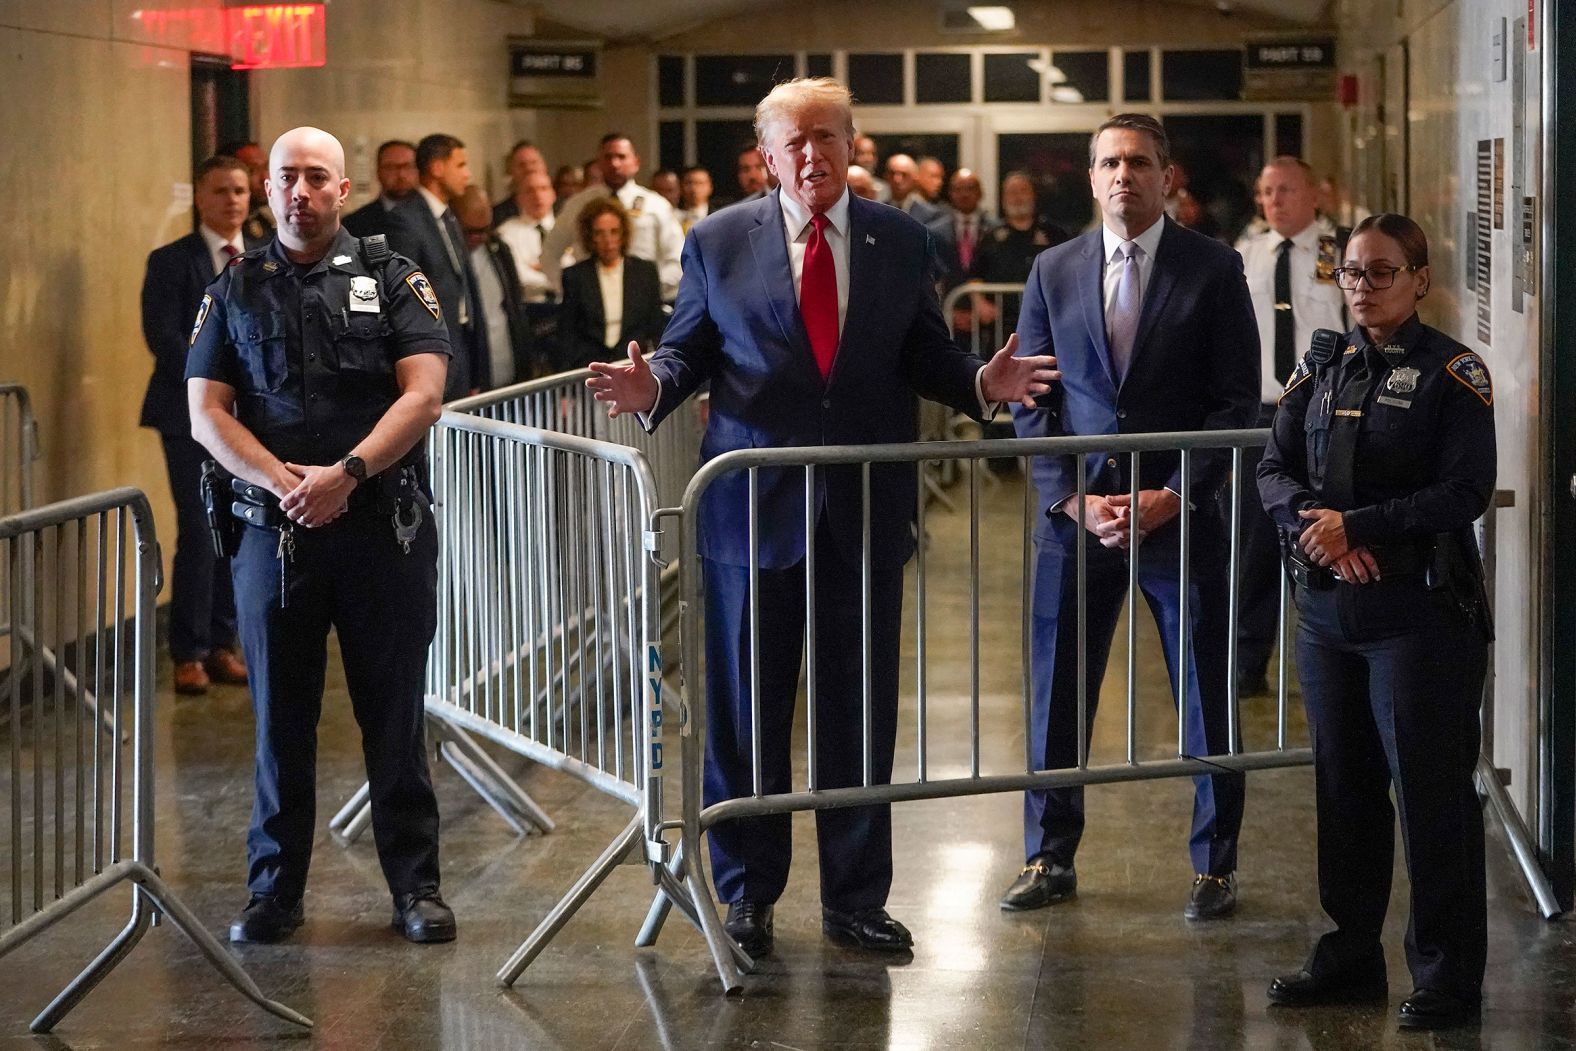 Trump speaks before entering the courtroom in New York on February 15. "This is not a crime," <a href="https://www.cnn.com/politics/live-news/trump-hearings-ny-georgia/h_4e1d4ddd01b2853ca32b0036f2ca9ead" target="_blank">he told reporters in the courthouse hallway</a>. He added that he'd rather spend his time campaigning than in courtrooms: "We want delays, obviously I'm running for election."